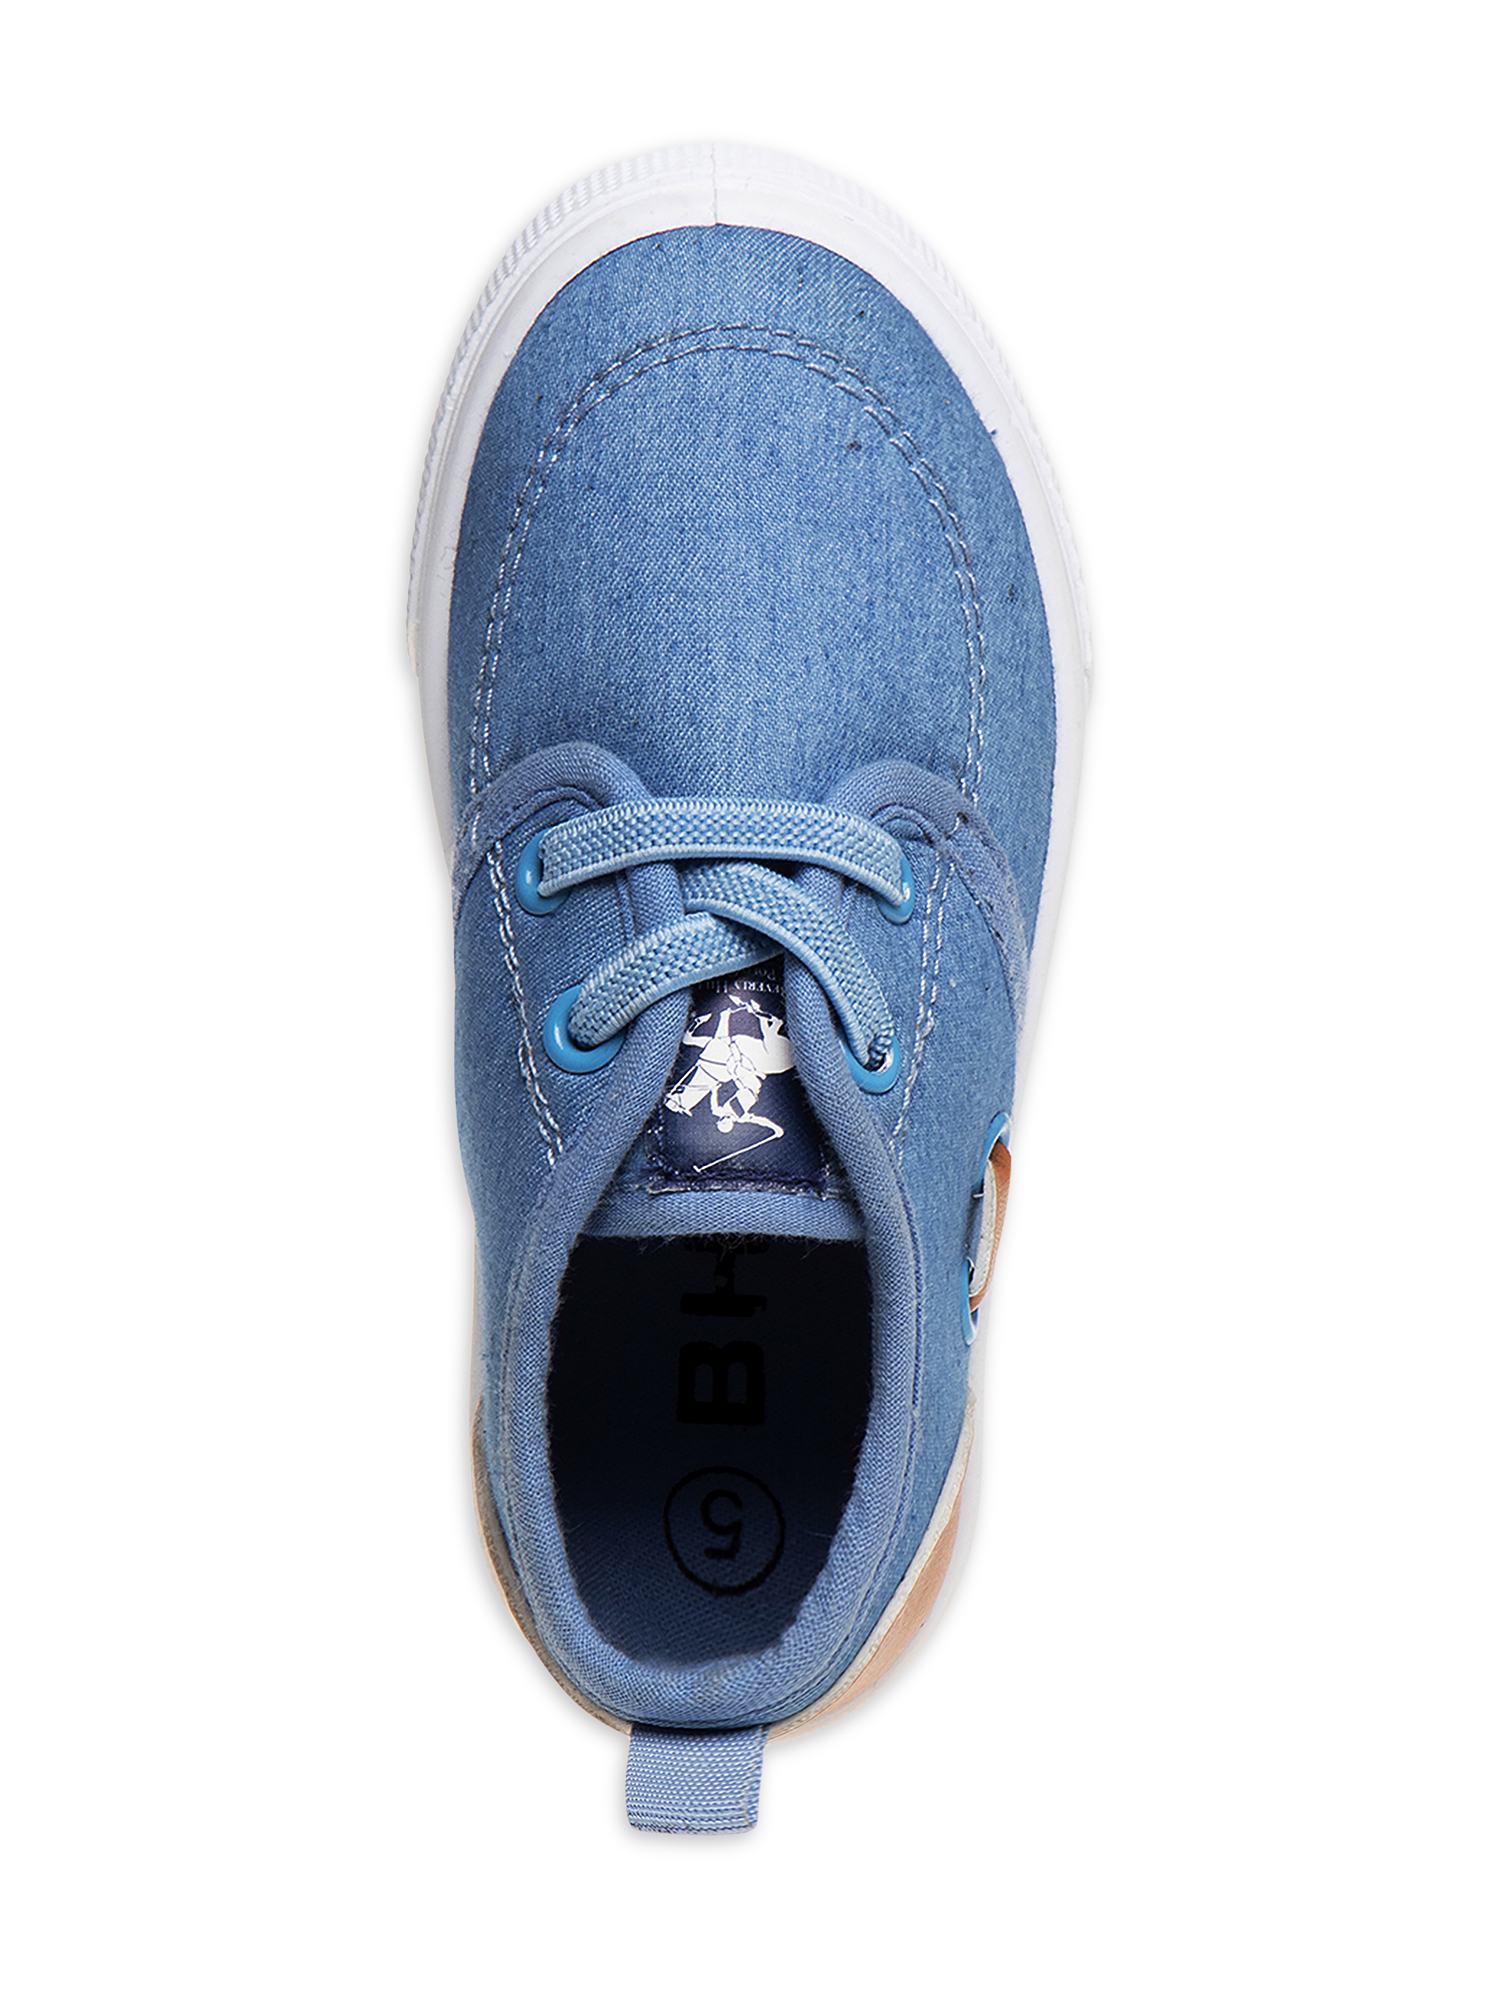 Beverly Hills Polo Club Toddler Boys Denim Colorblock Casual Sneakers - image 4 of 5